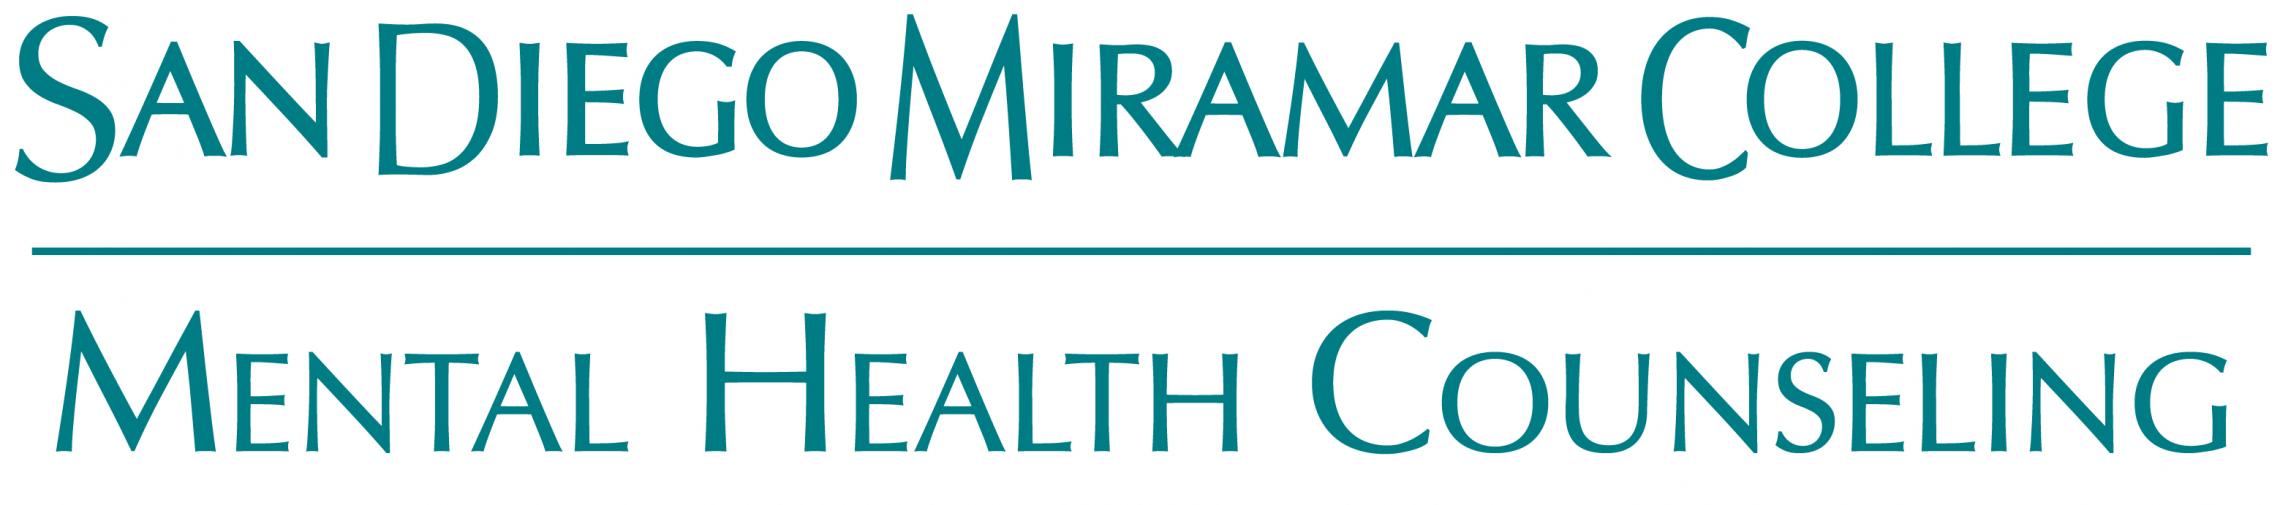 A graphic displaying the following, "San Diego Miramar College Mental Health Counseling."